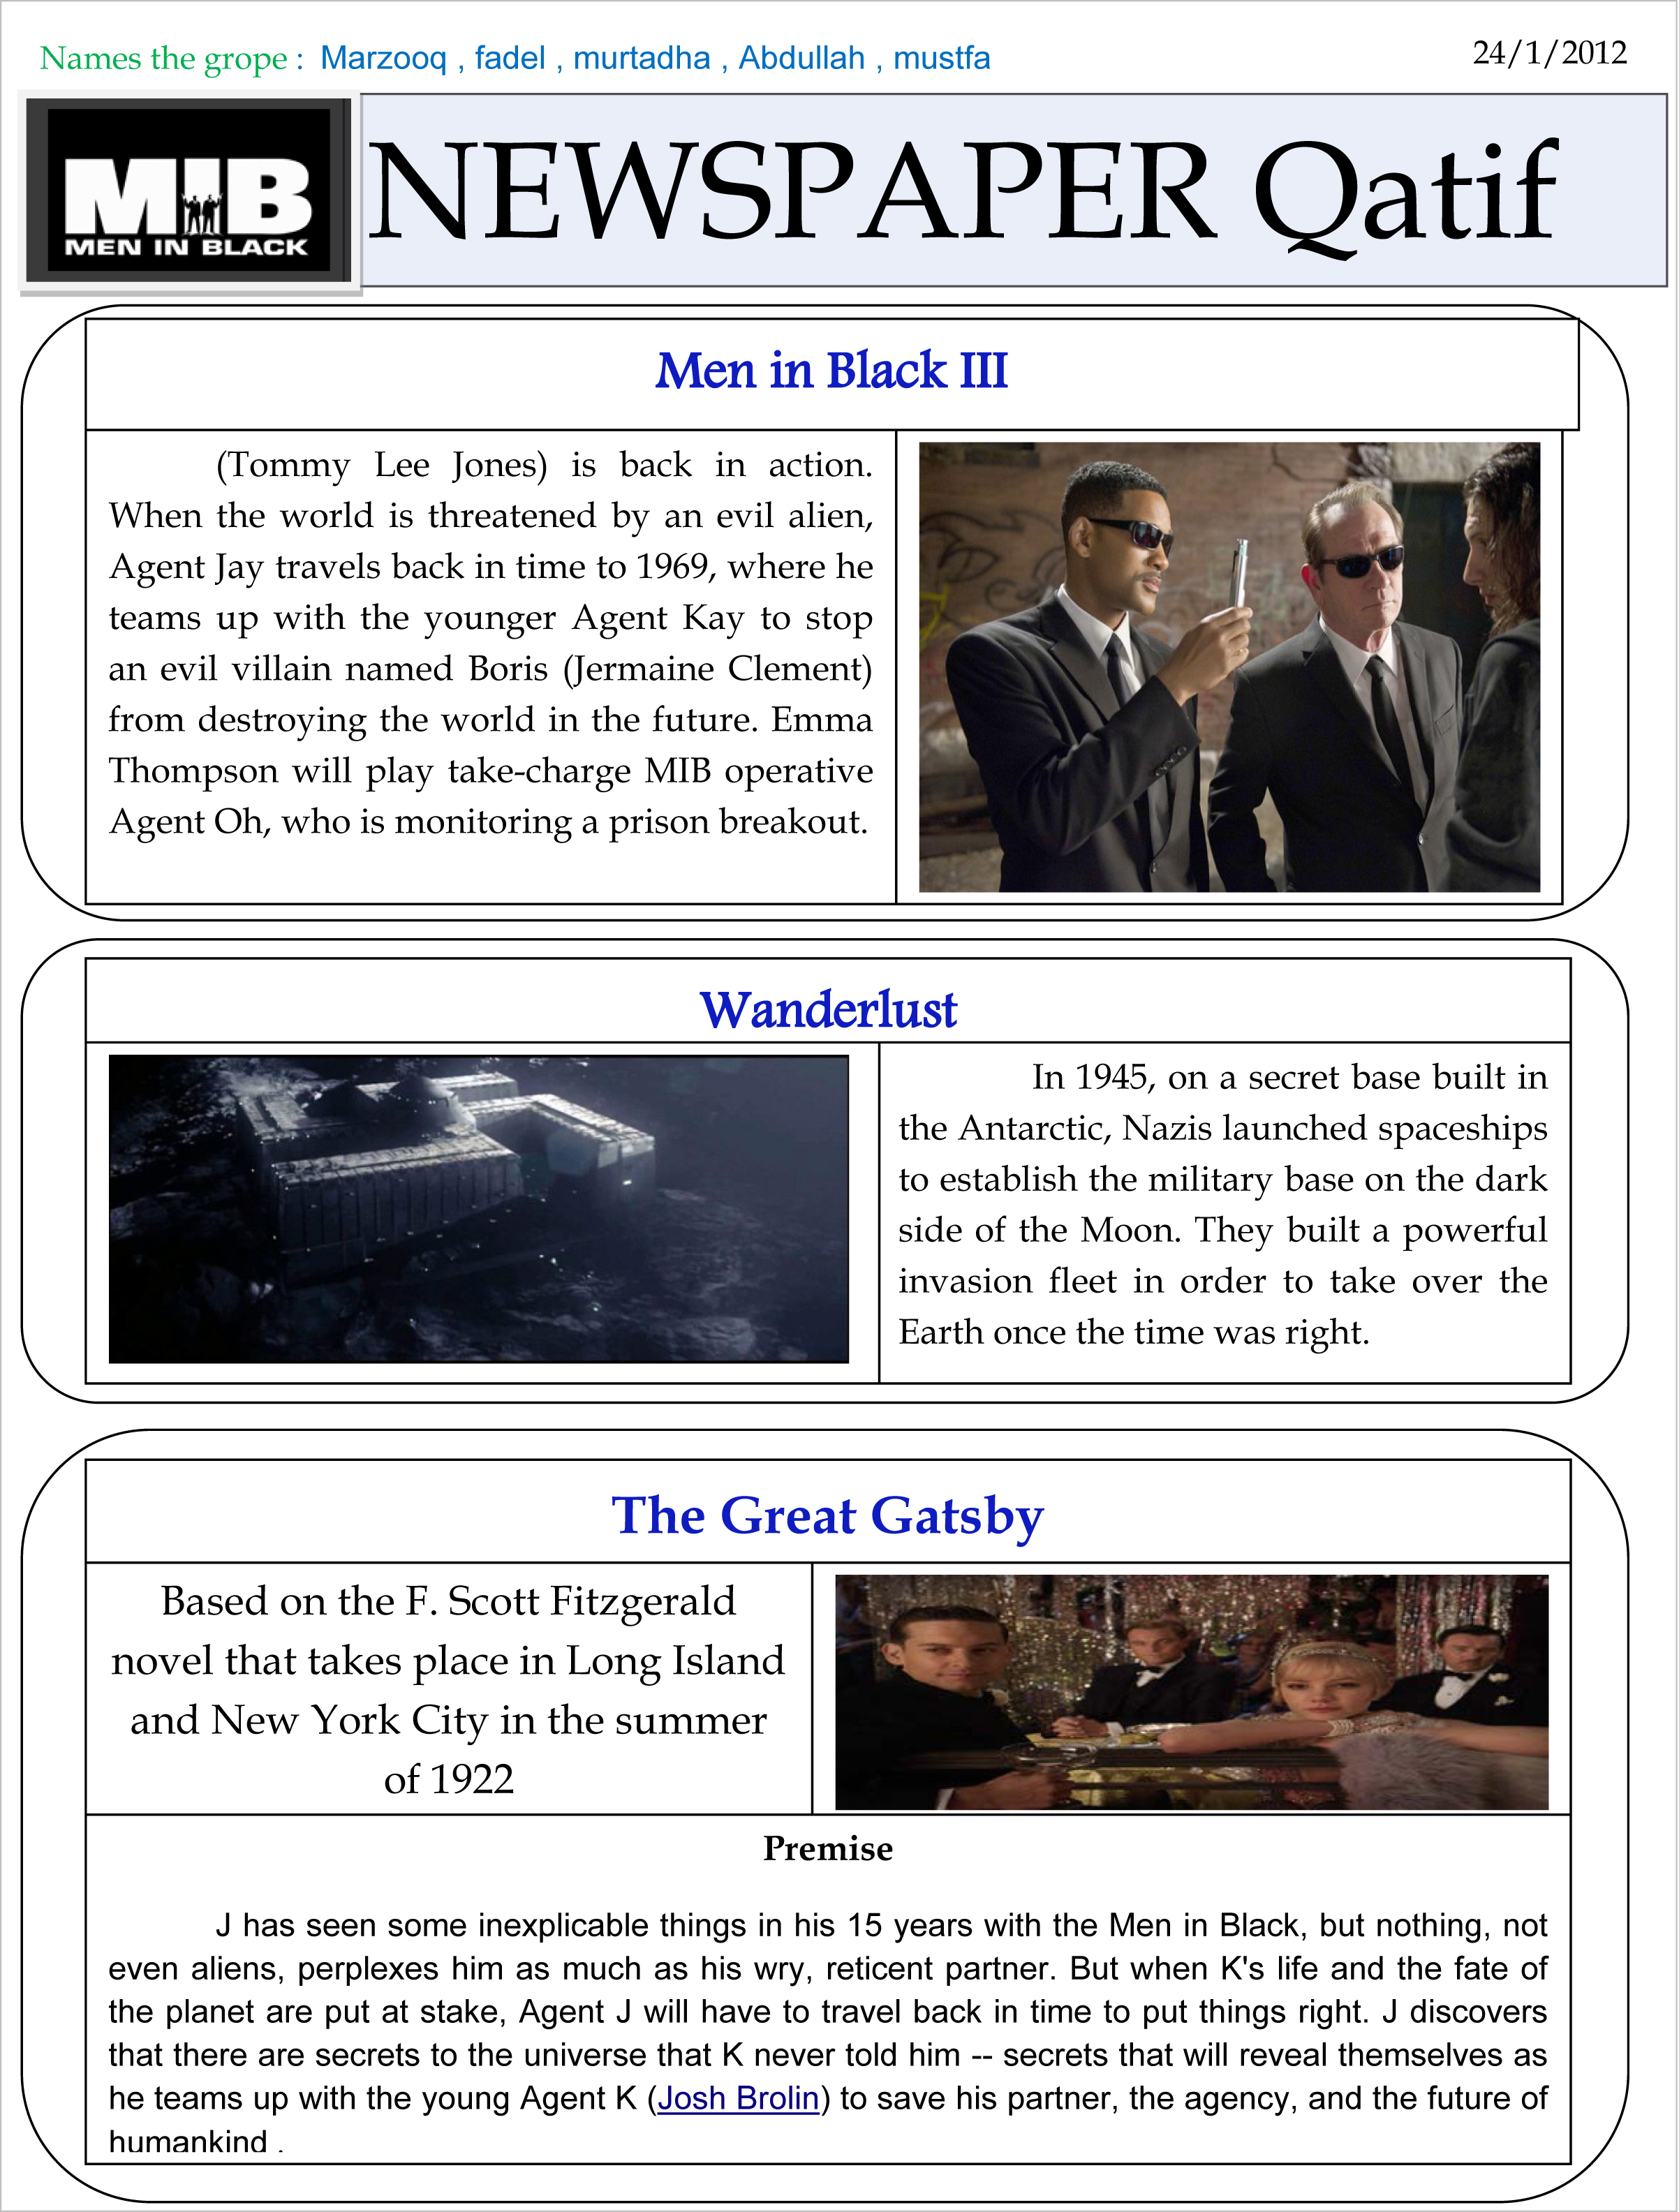 Newspaper Template For Microsoft Word